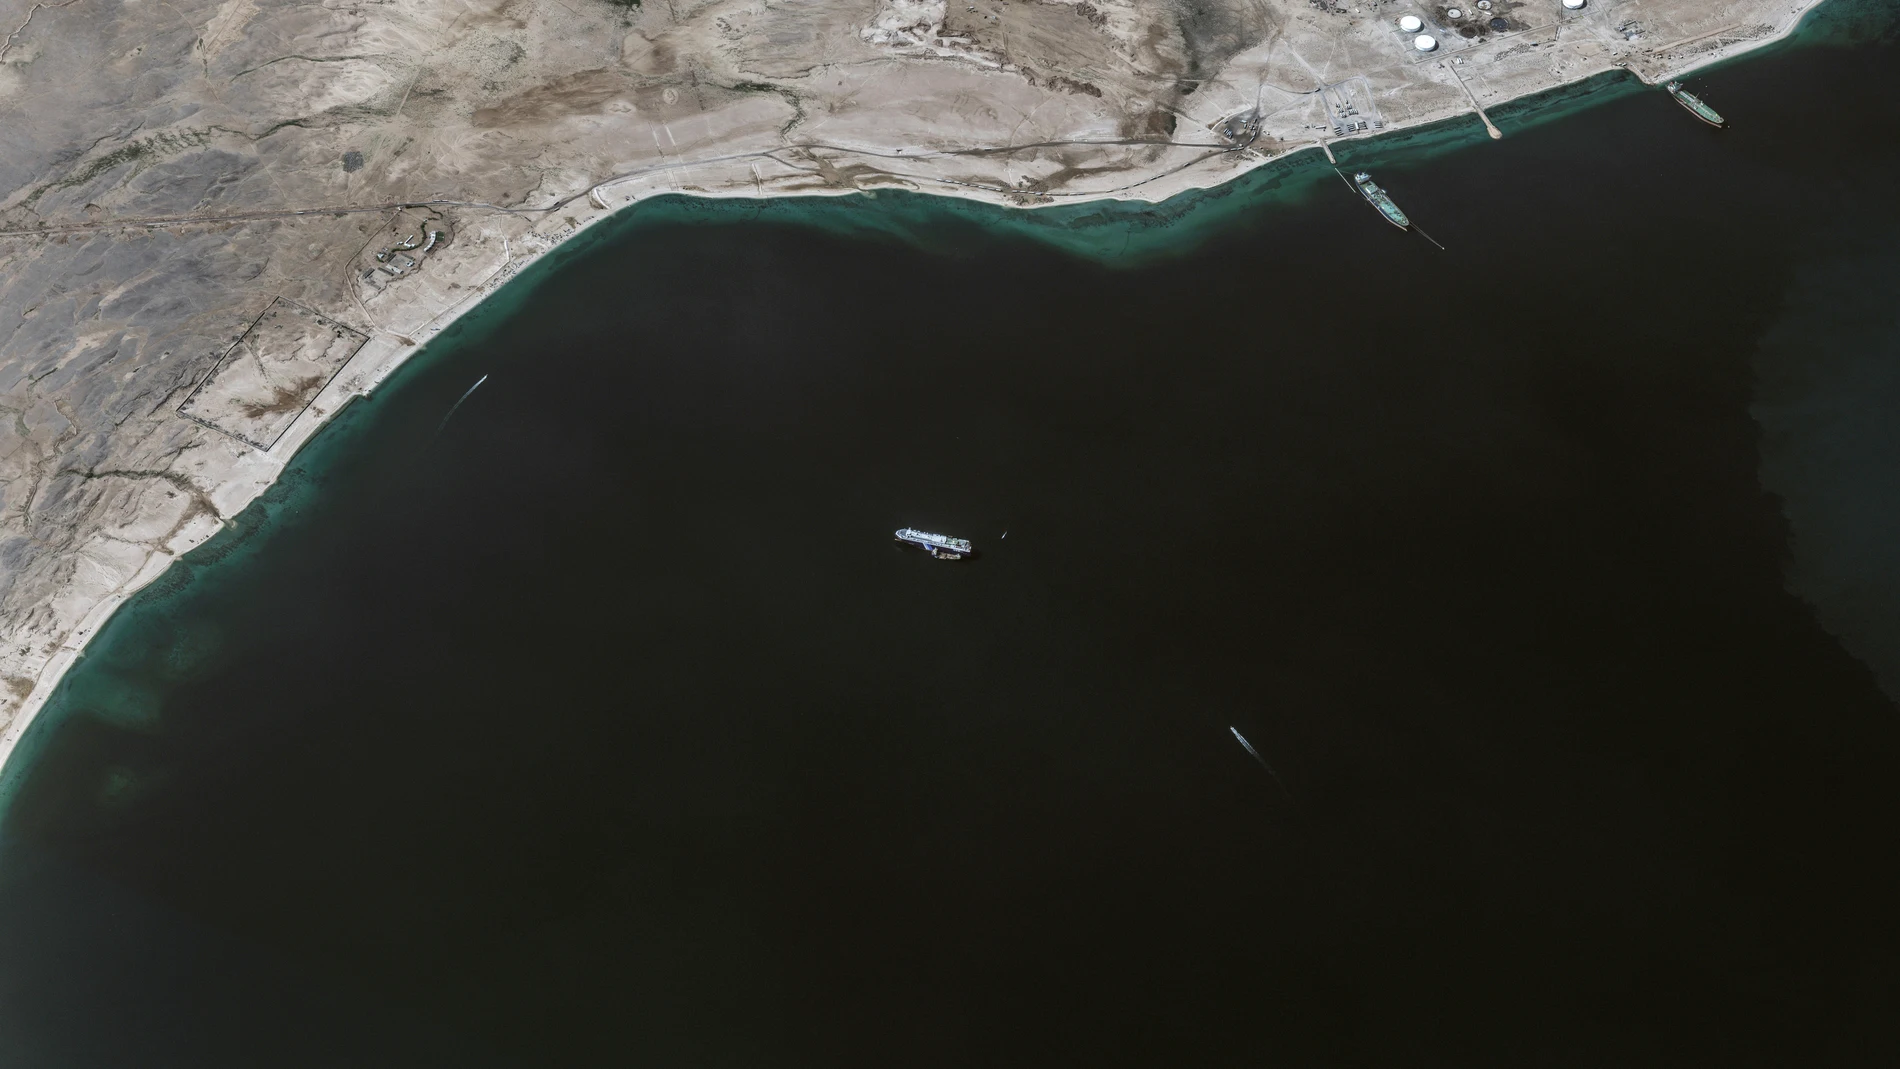 This satellite image provided by Maxar Technologies shows the Galaxy Leader ship anchored offshore of As Salif, Yemen, in the Red Sea, on Tuesday, Nov. 28, 2023. A support tender vessel is positioned nearby. The ship was captured by Houthi fighters on Nov. 19. (Satellite image ©2023 Maxar Technologies via AP)